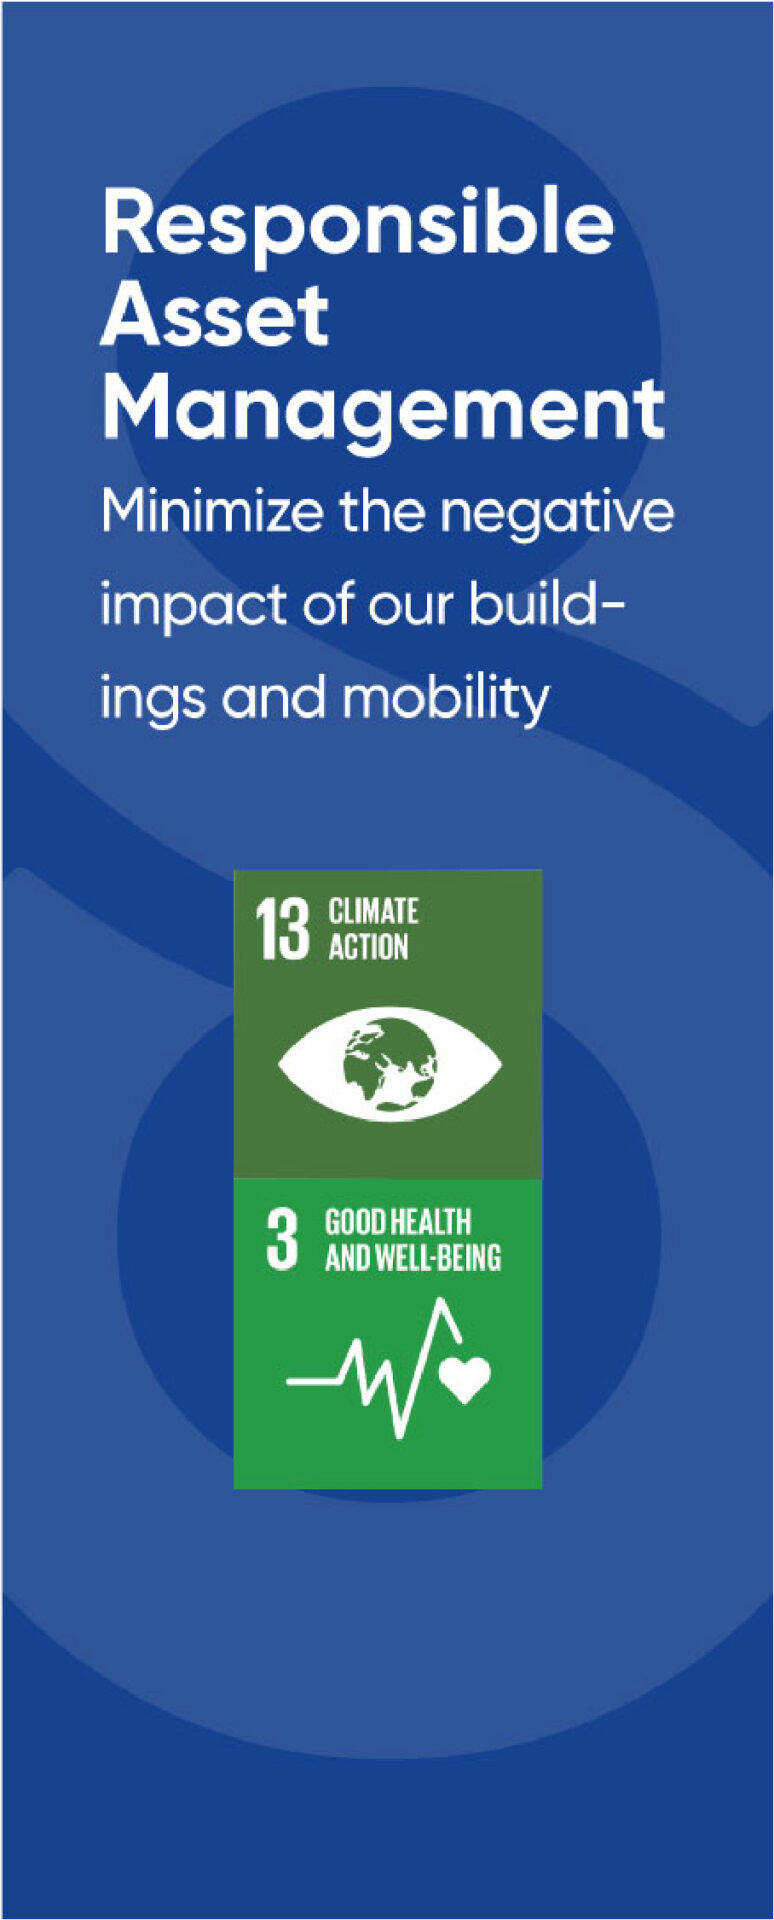 
Symbols of some sustainability pillars: Climate action, Good health and well-being.